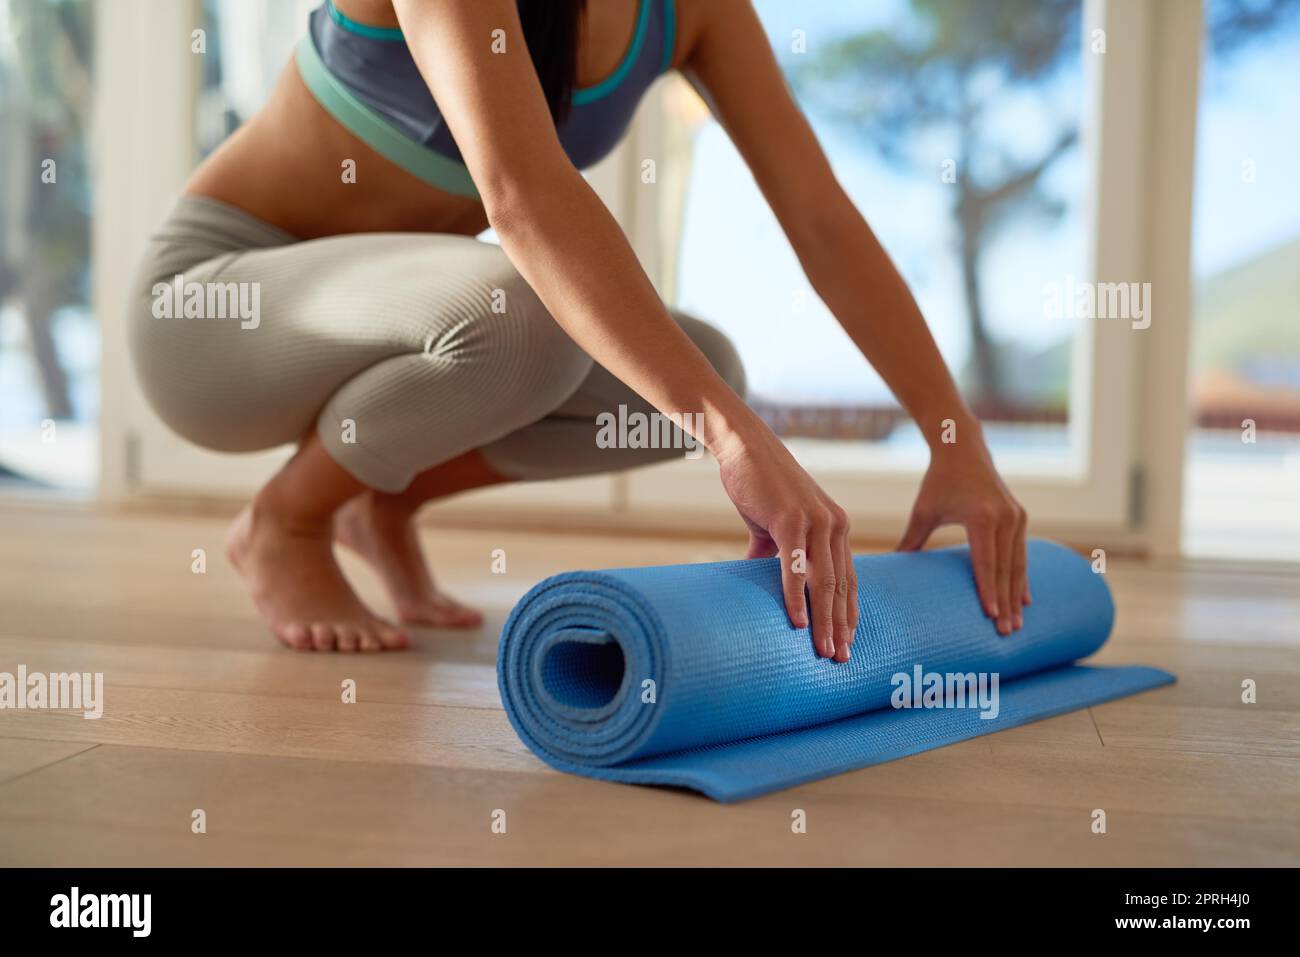 Roll out fatigue and roll in fitness. an unidentifiable woman rolling a yoga mat. Stock Photo